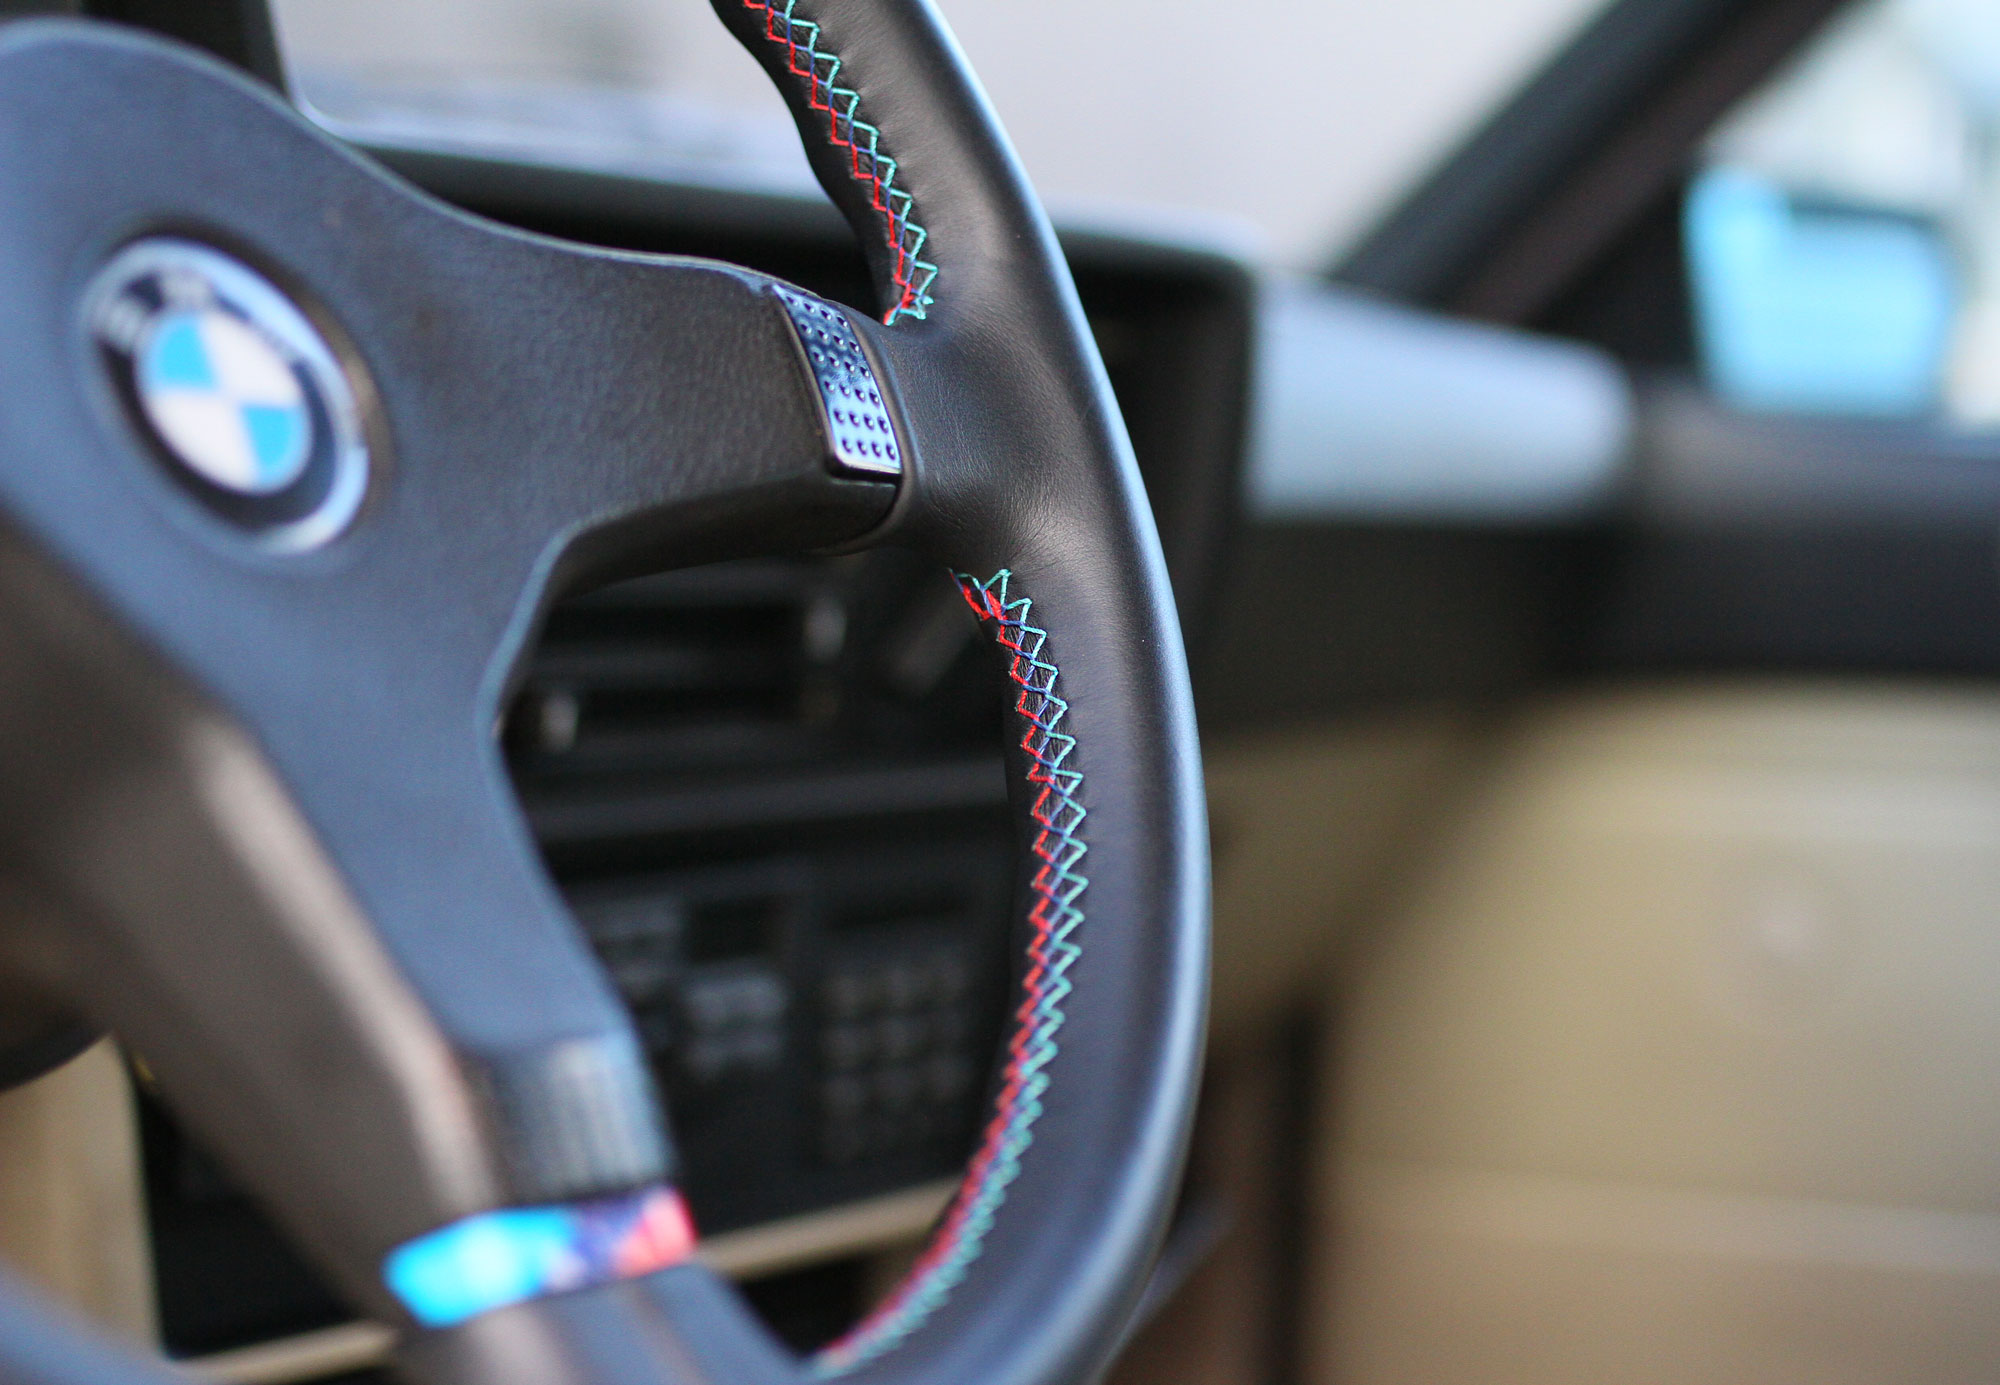 The M-steering wheel in the BMW 635 CSi